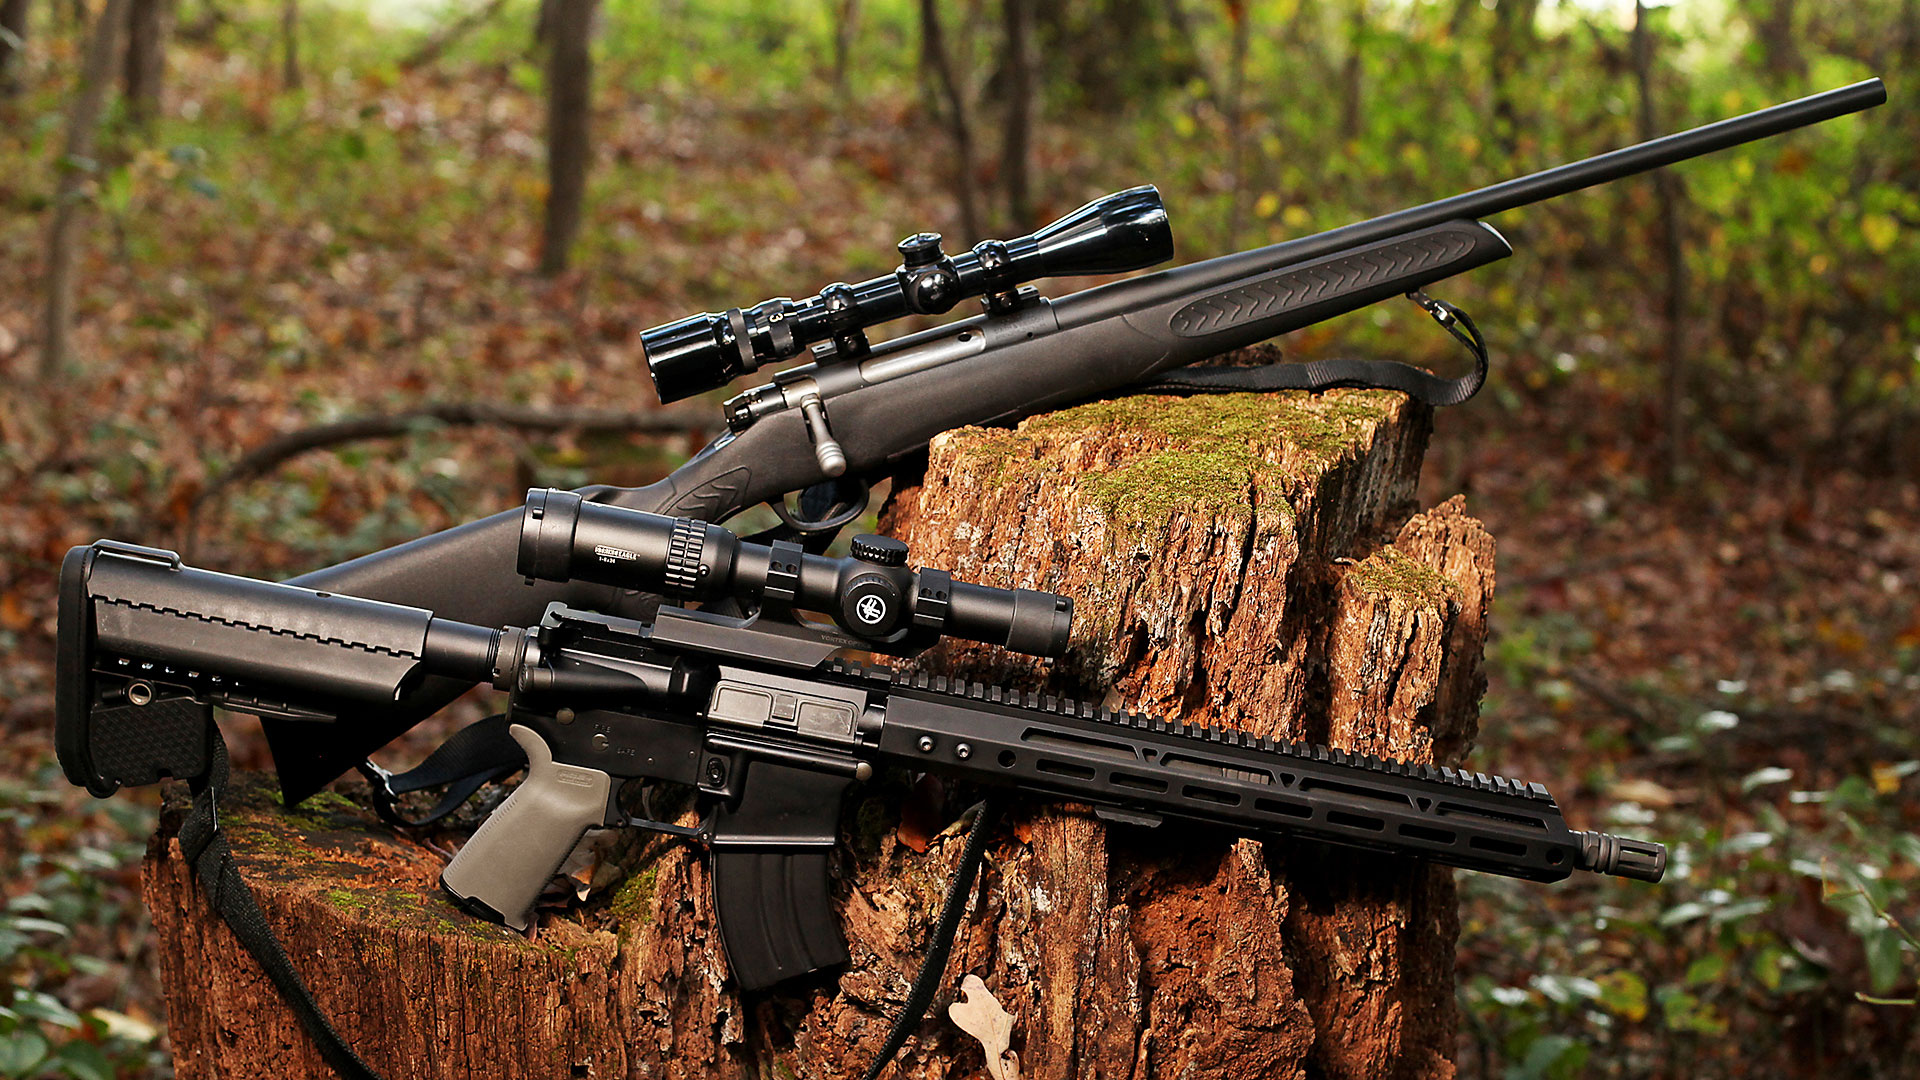 Military Journal - Most Powerful Hunting Rifles - Brush hunting refers ...